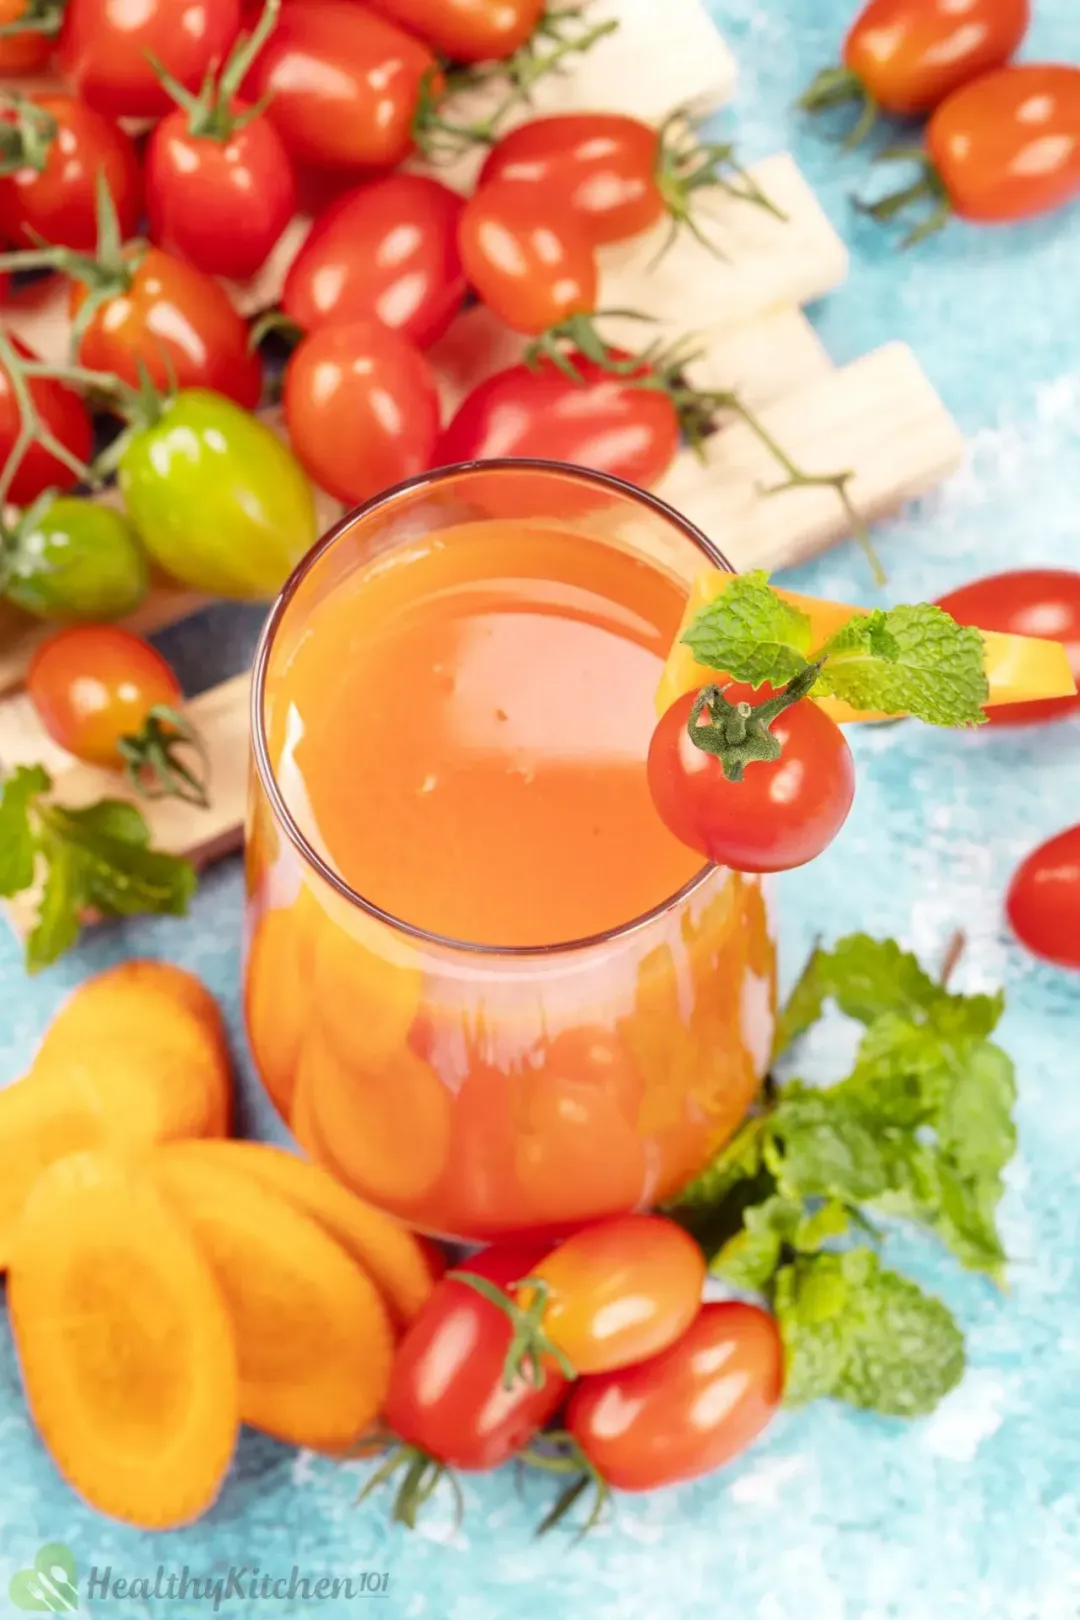 A shot from the top of a carrot tomato juice surrounded by mints, lots of cherry tomatoes, and carrot slices